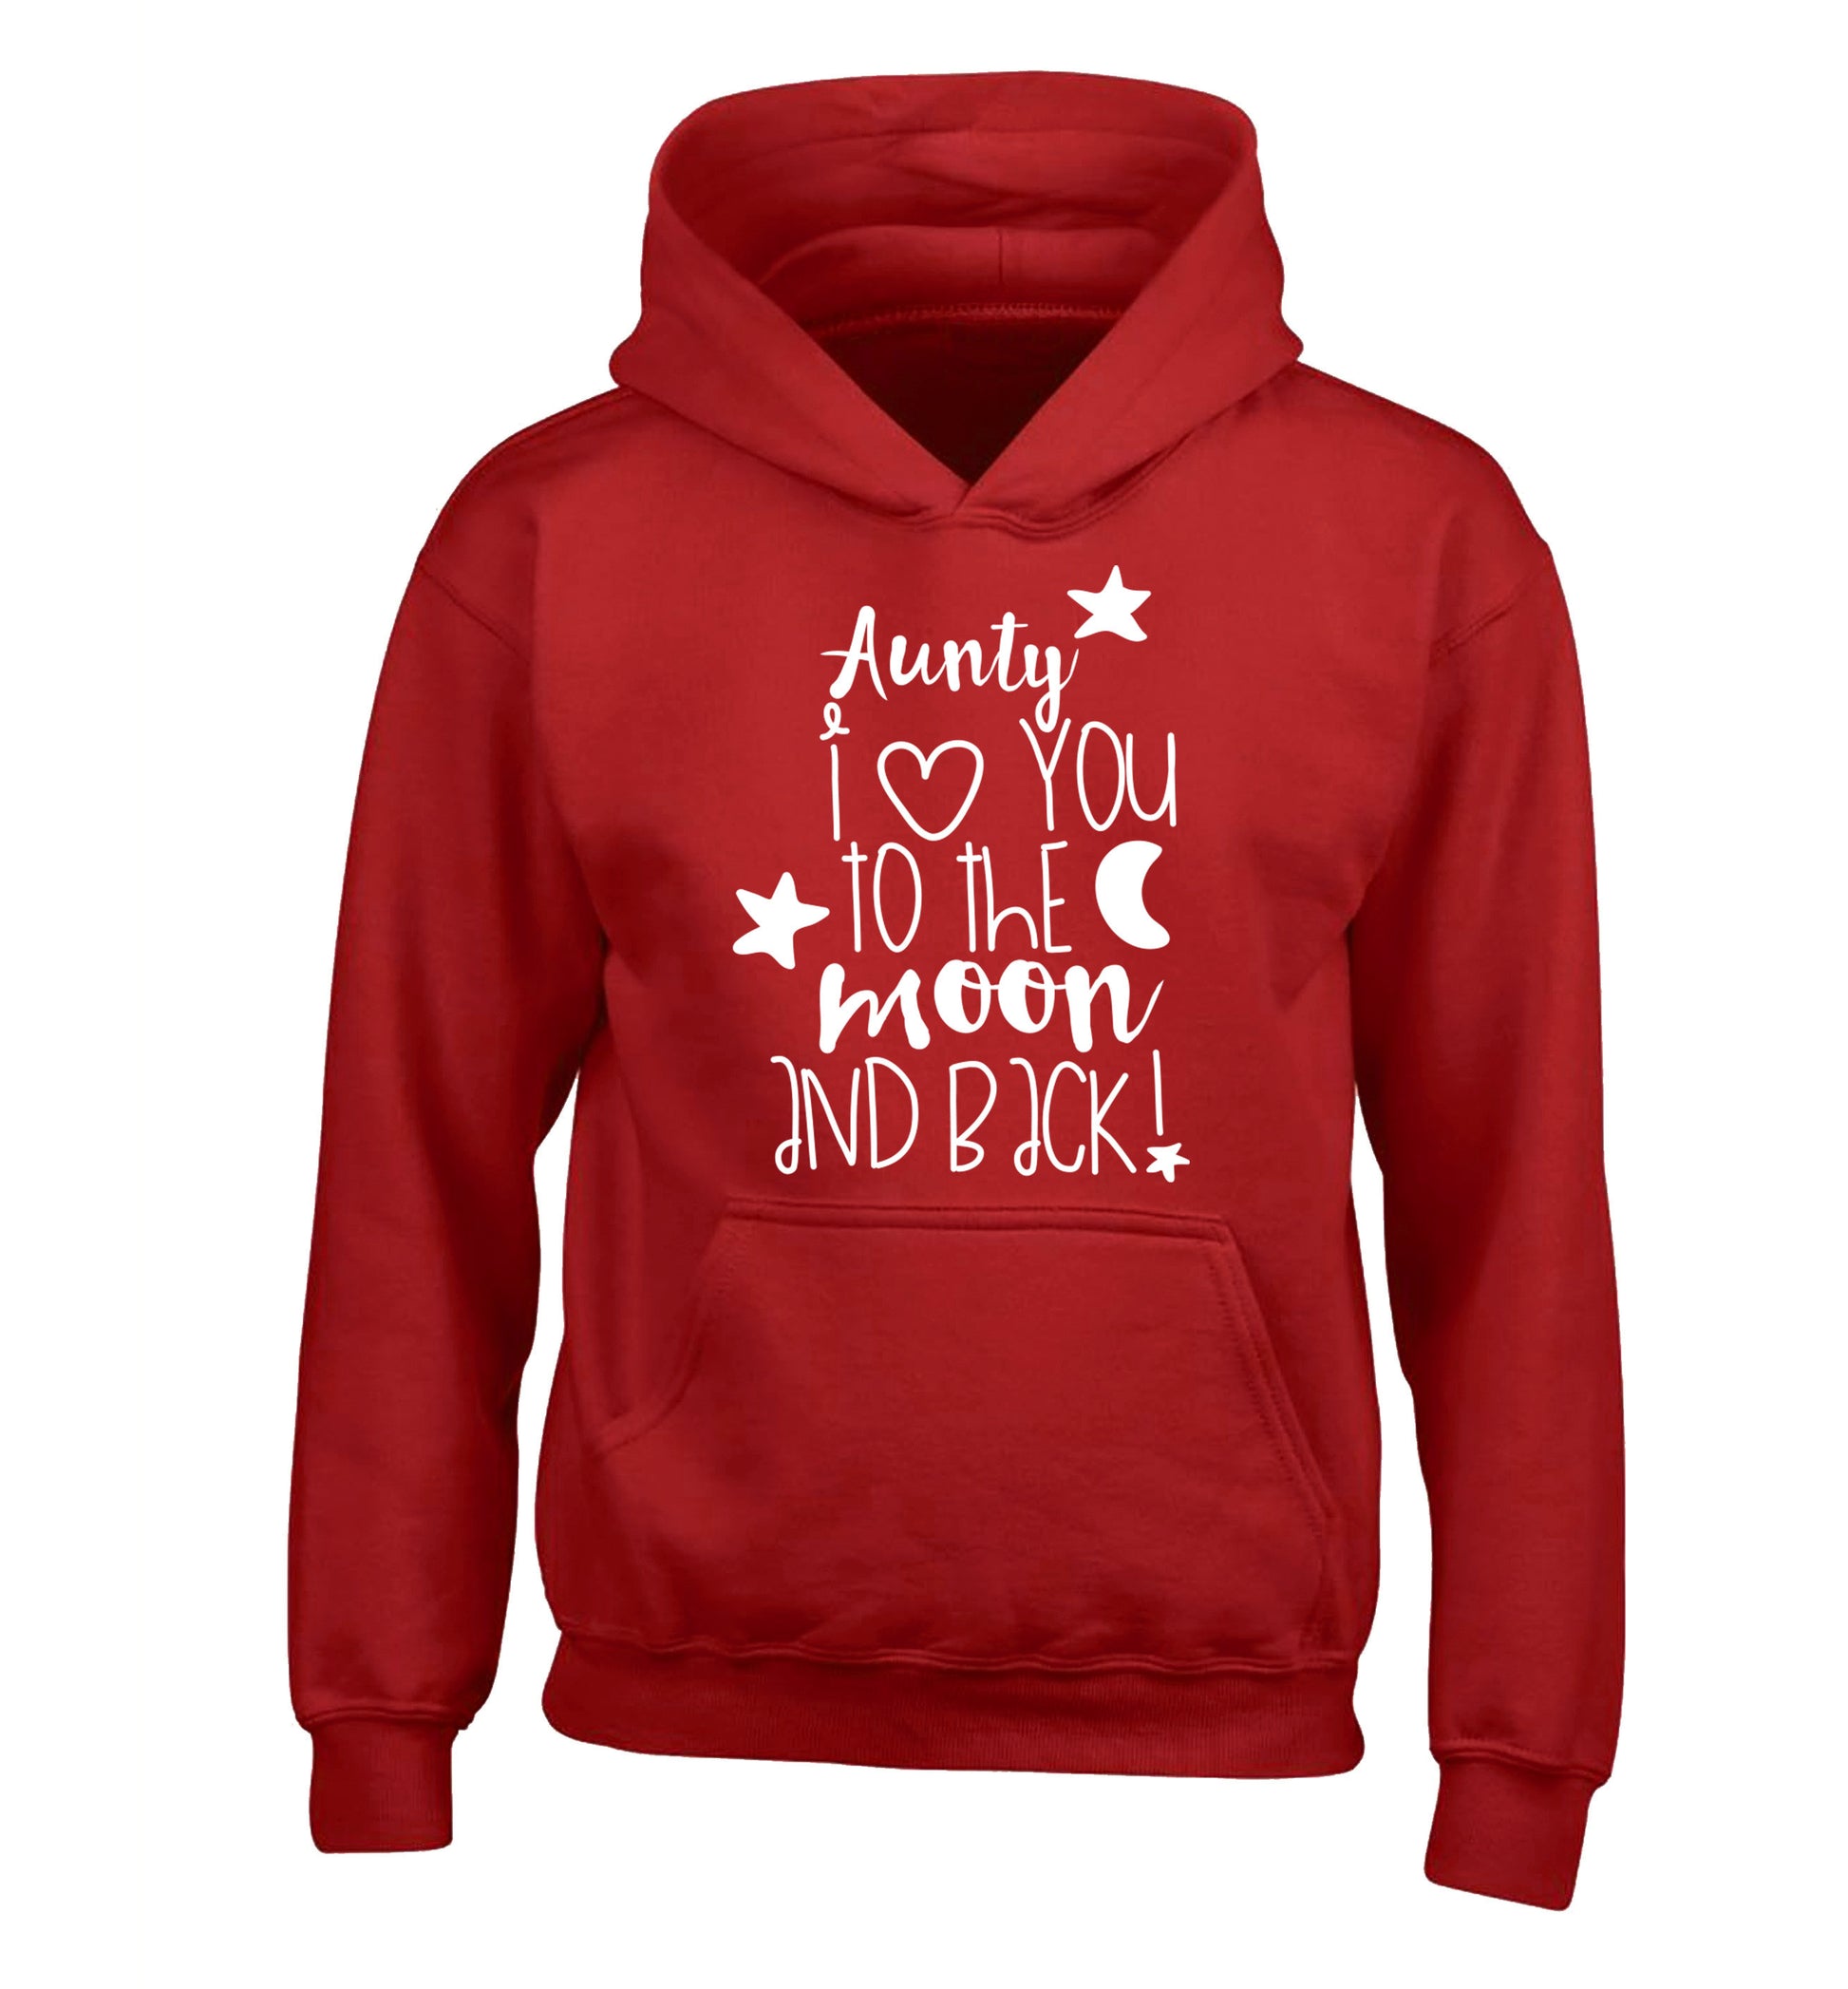 Aunty I love you to the moon and back children's red hoodie 12-14 Years